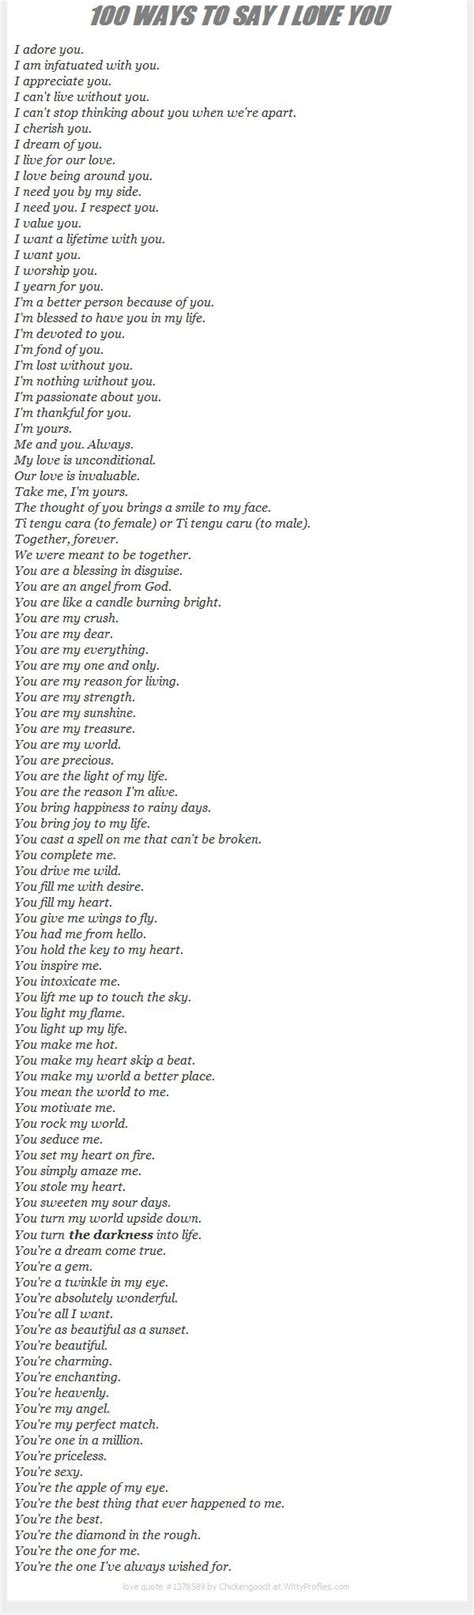 100 Ways To Say I Love You Pictures Photos And Images For Facebook